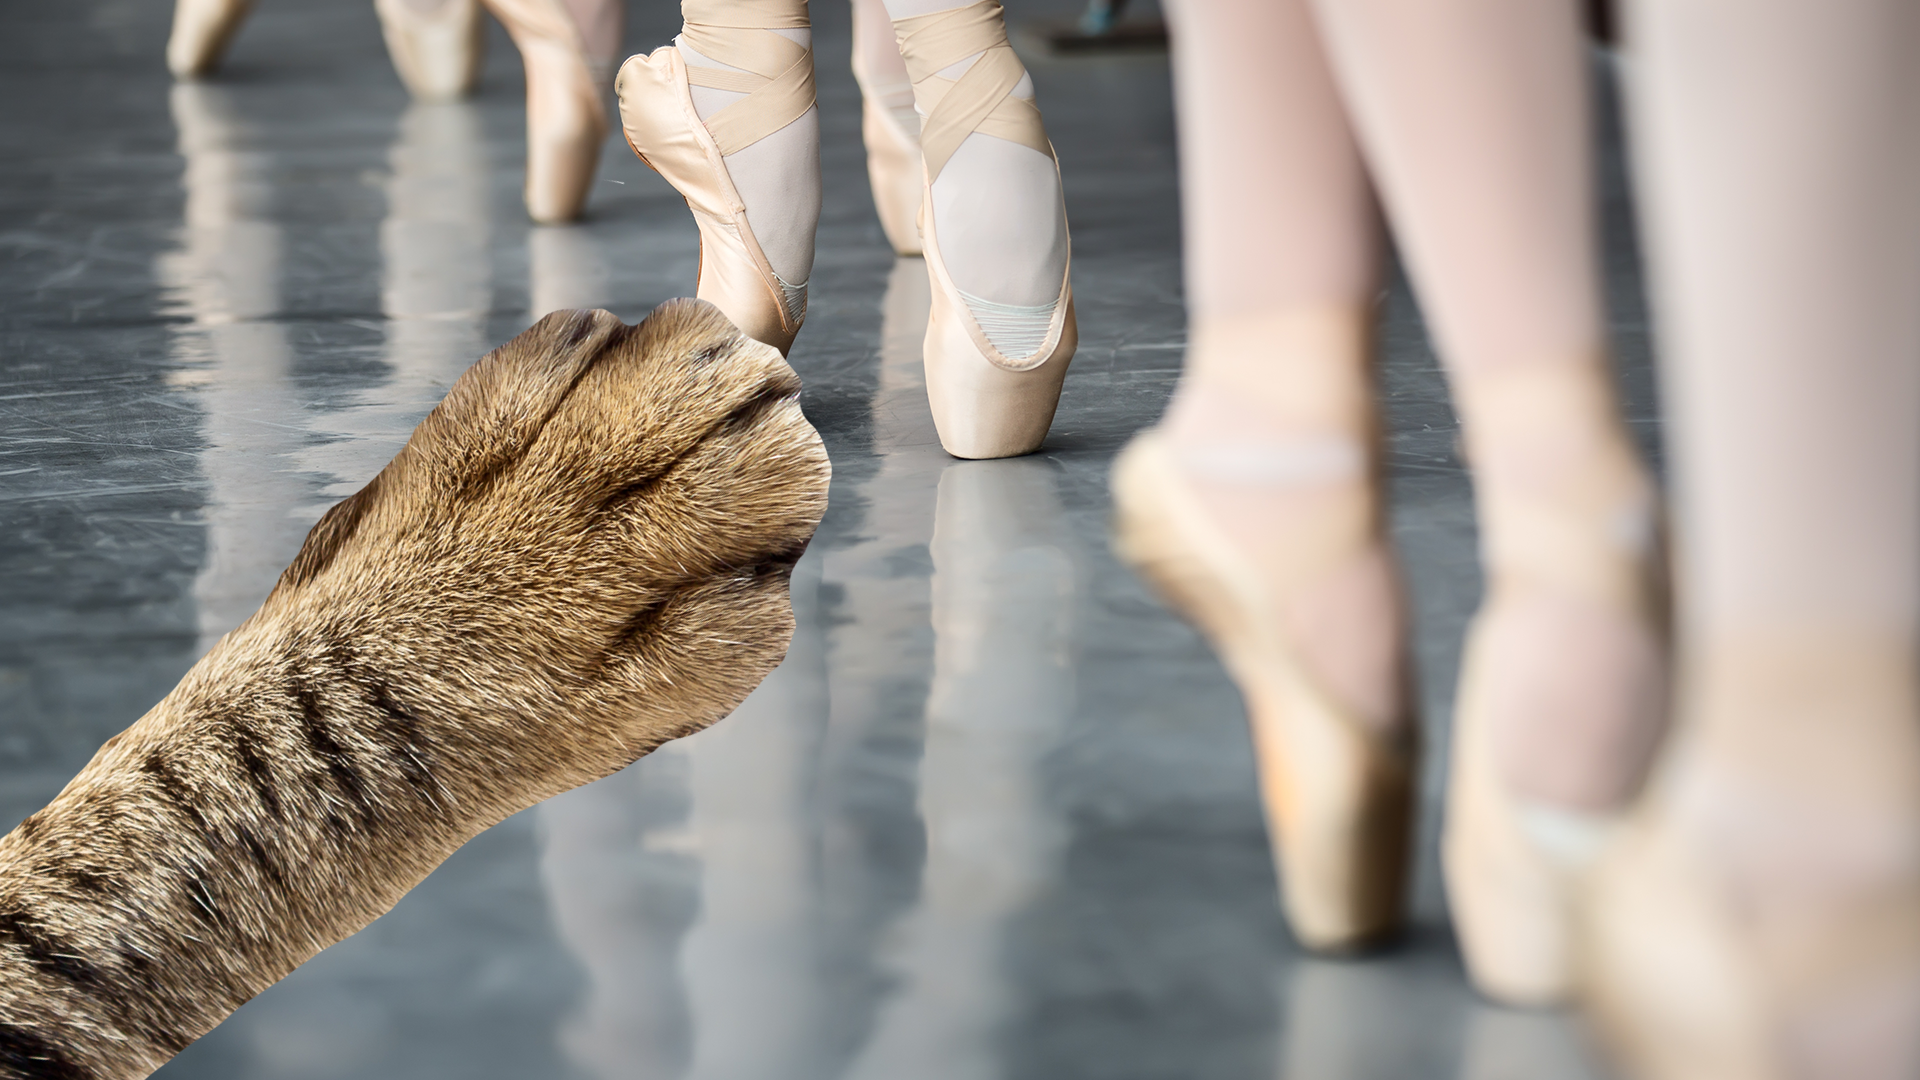 Cat paw reaching for ballet shoes